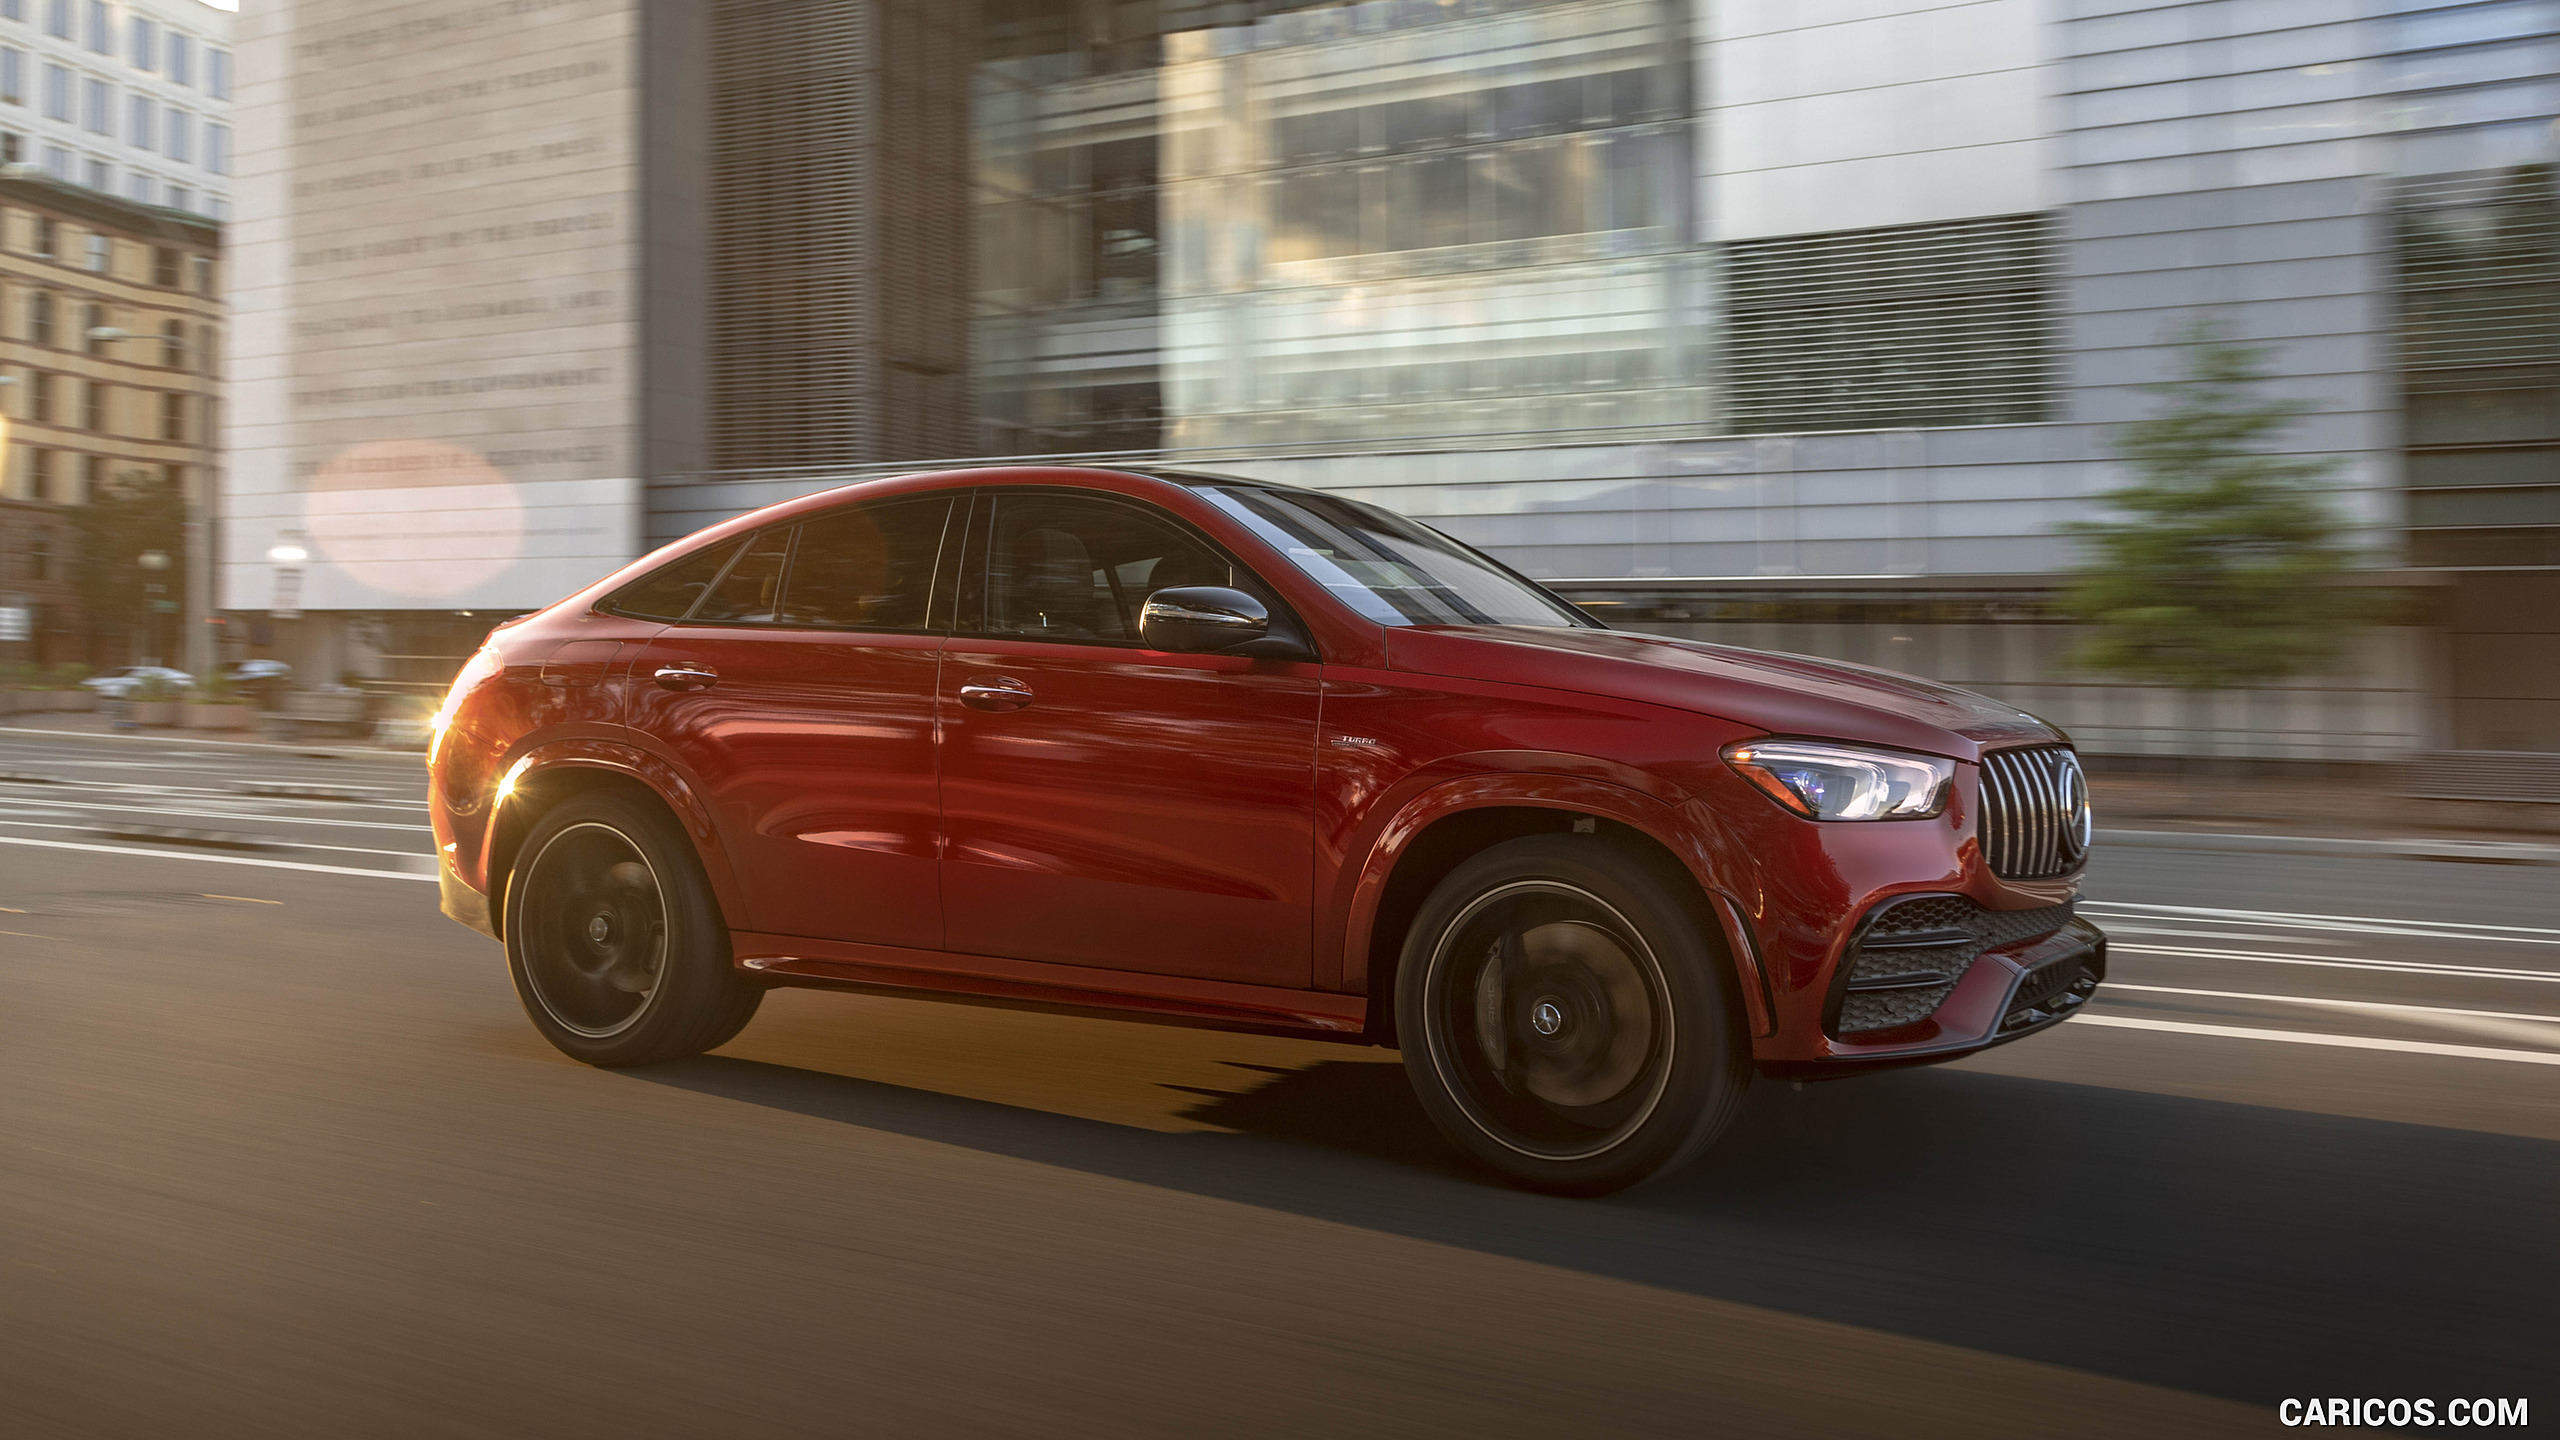 2021 Mercedes-AMG GLE 53 Coupe - Front Three-Quarter, #122 of 178